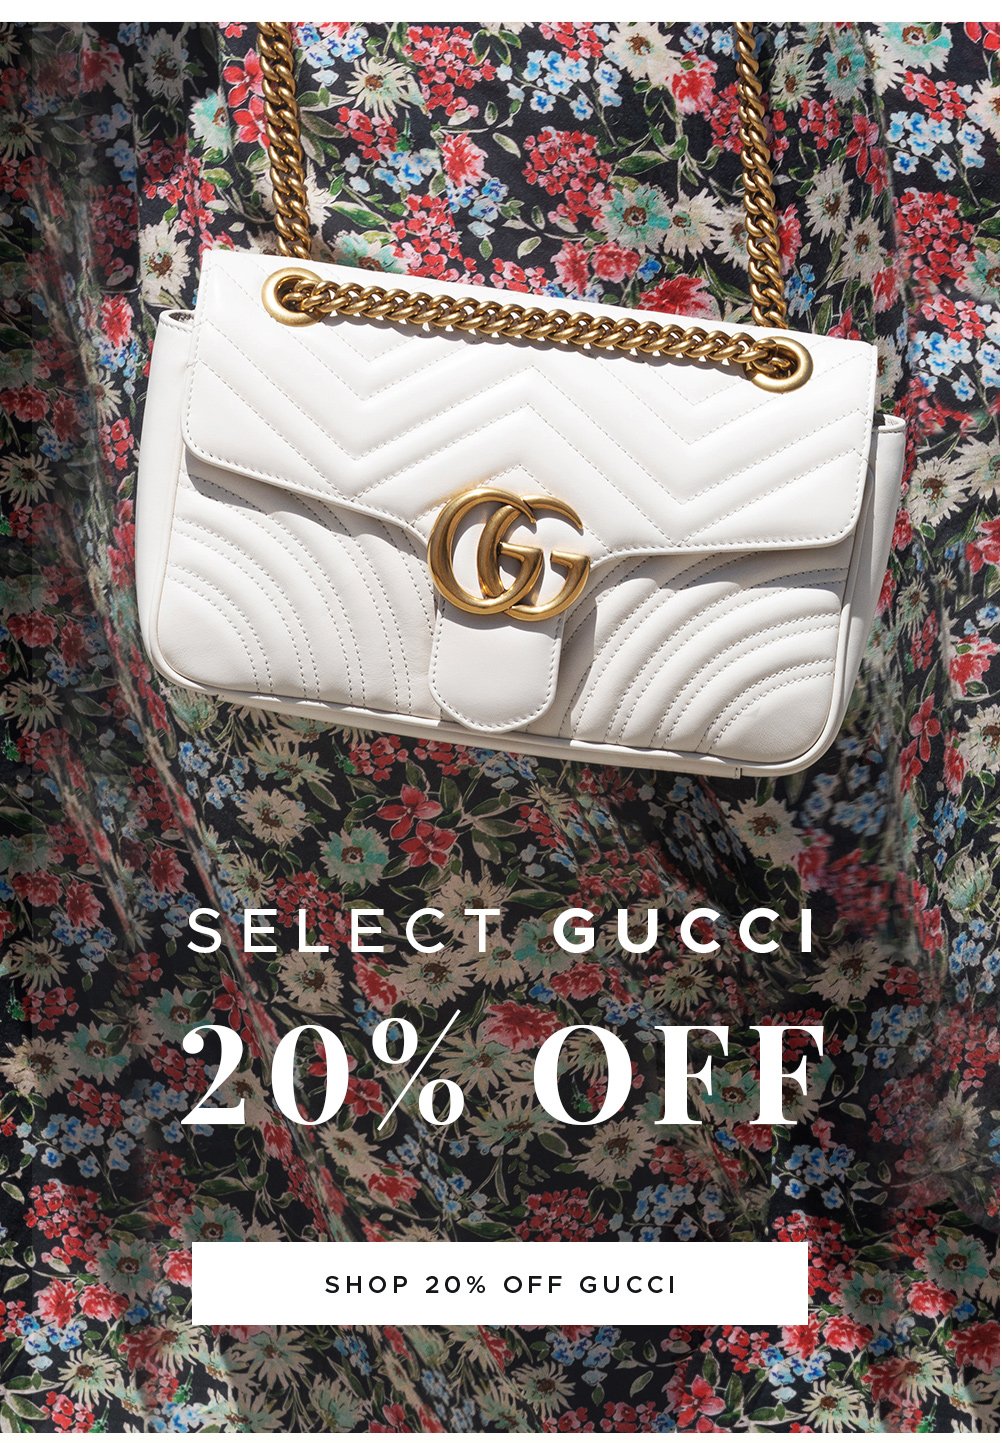 Fashionphile: Select Gucci 20% Off | Milled